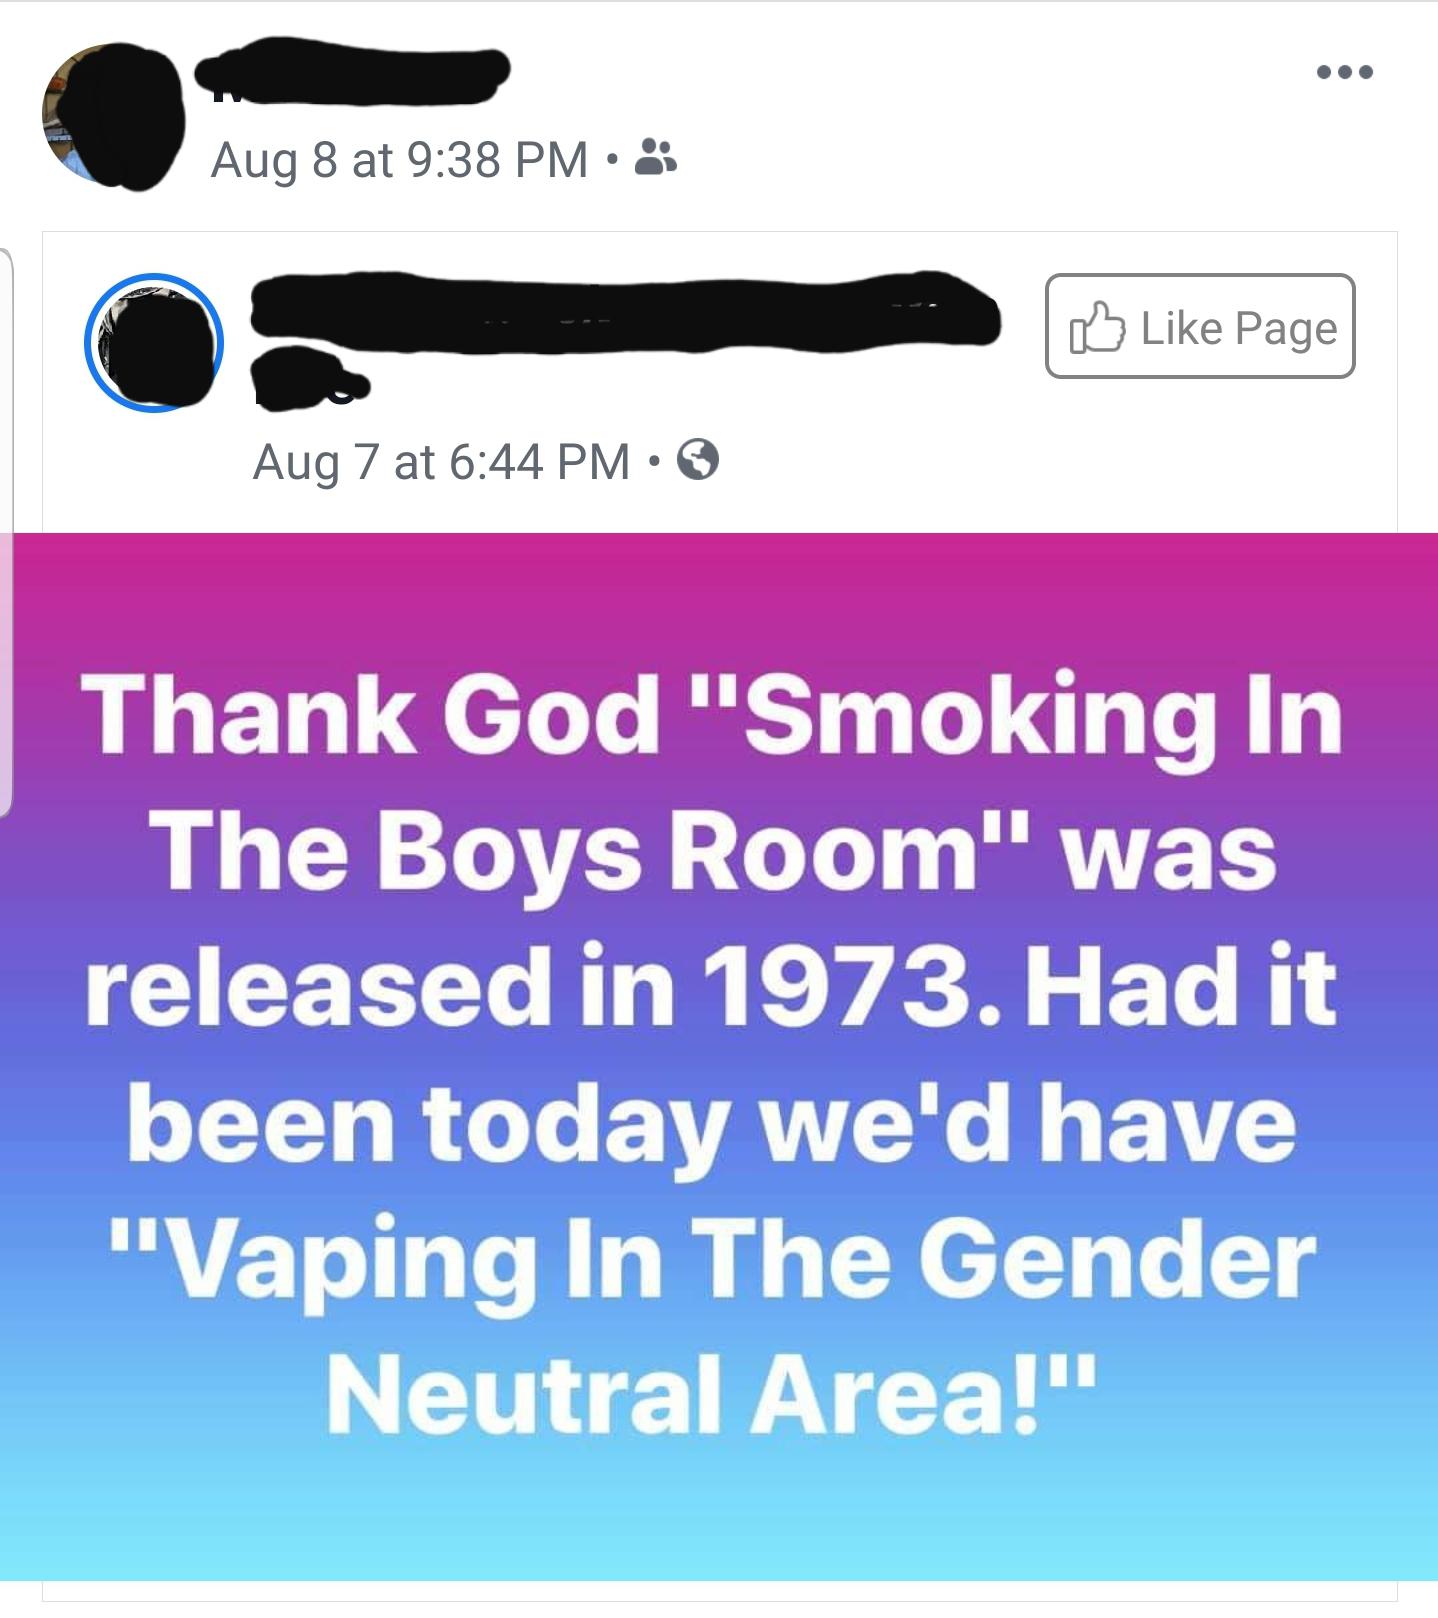 Aug 8 at Page Aug 7 at Thank God Smoking In The Boys Room was released in 1973. Had it been today we'd have Vaping In The Gender Neutral Area!